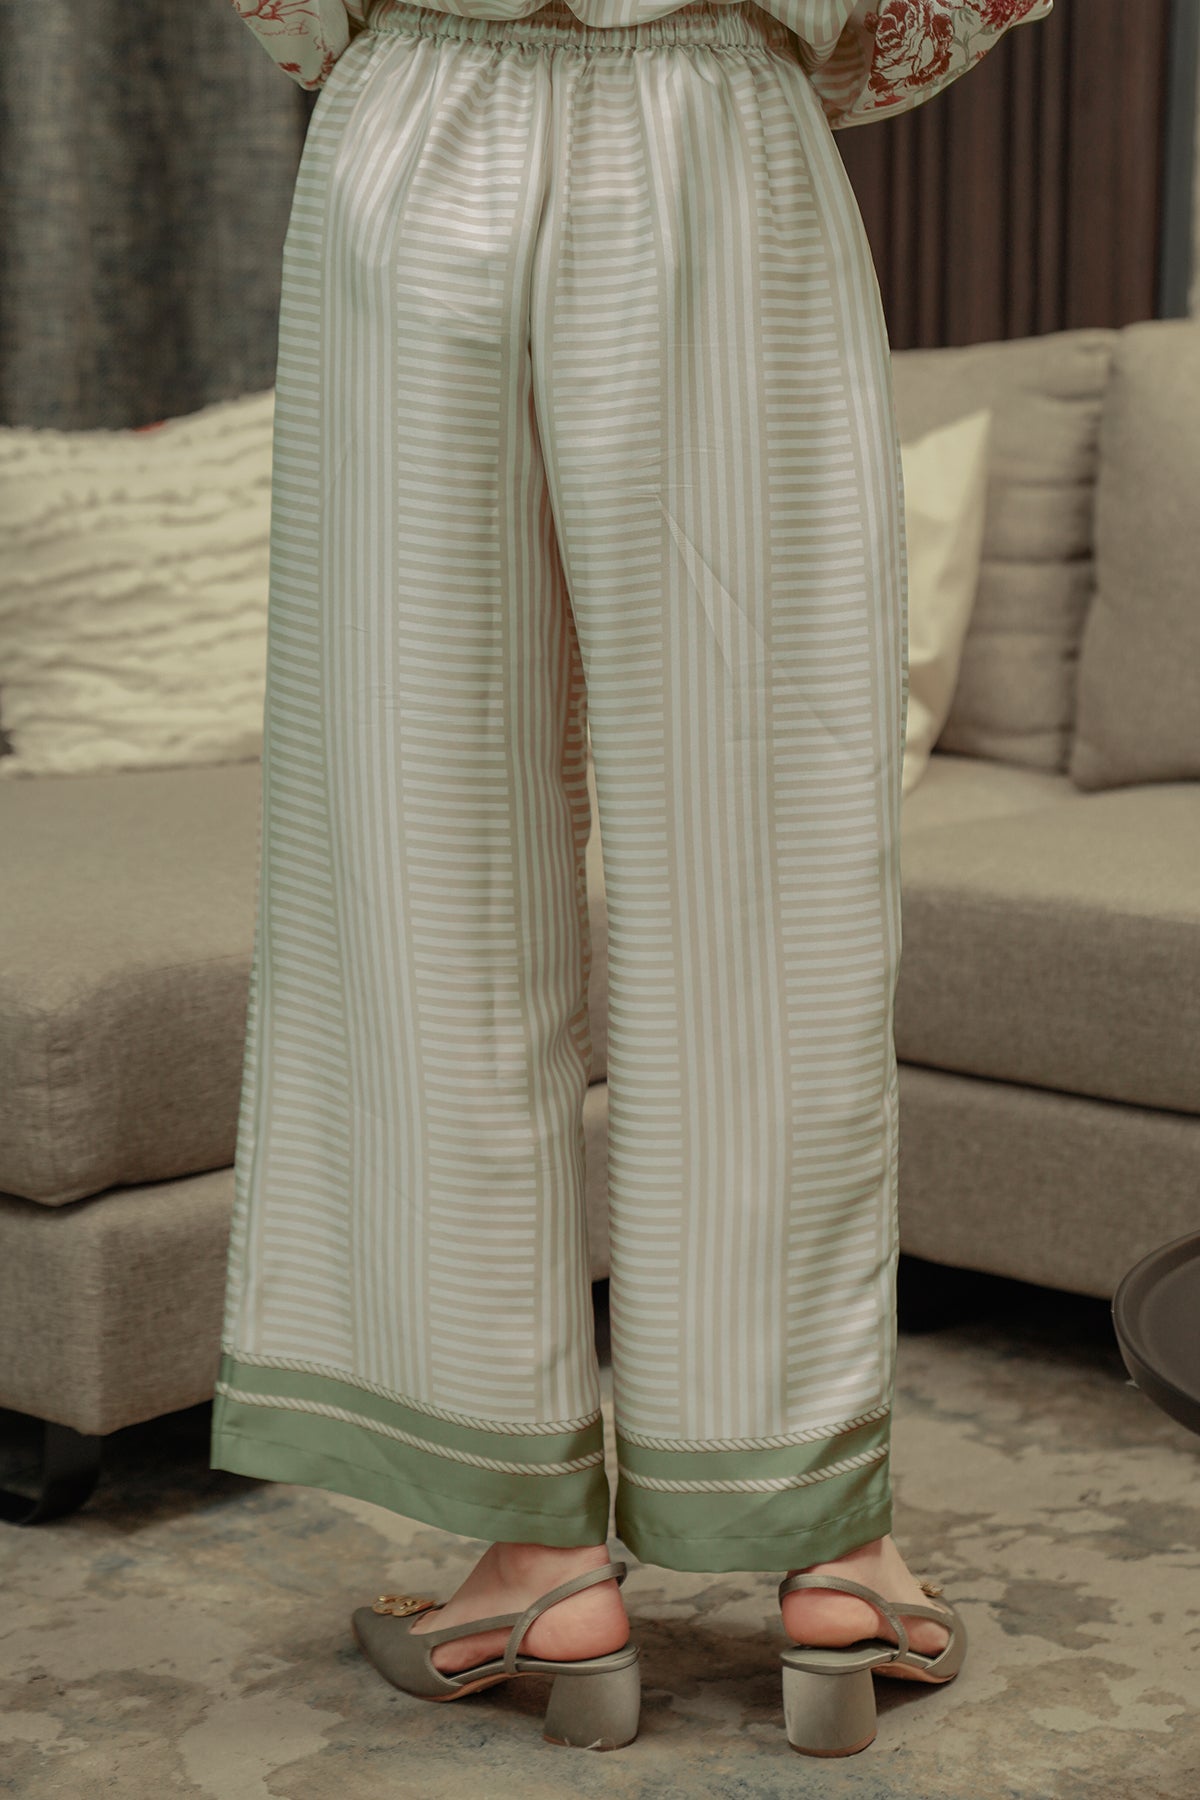 Chinoiserie Pants - Olive